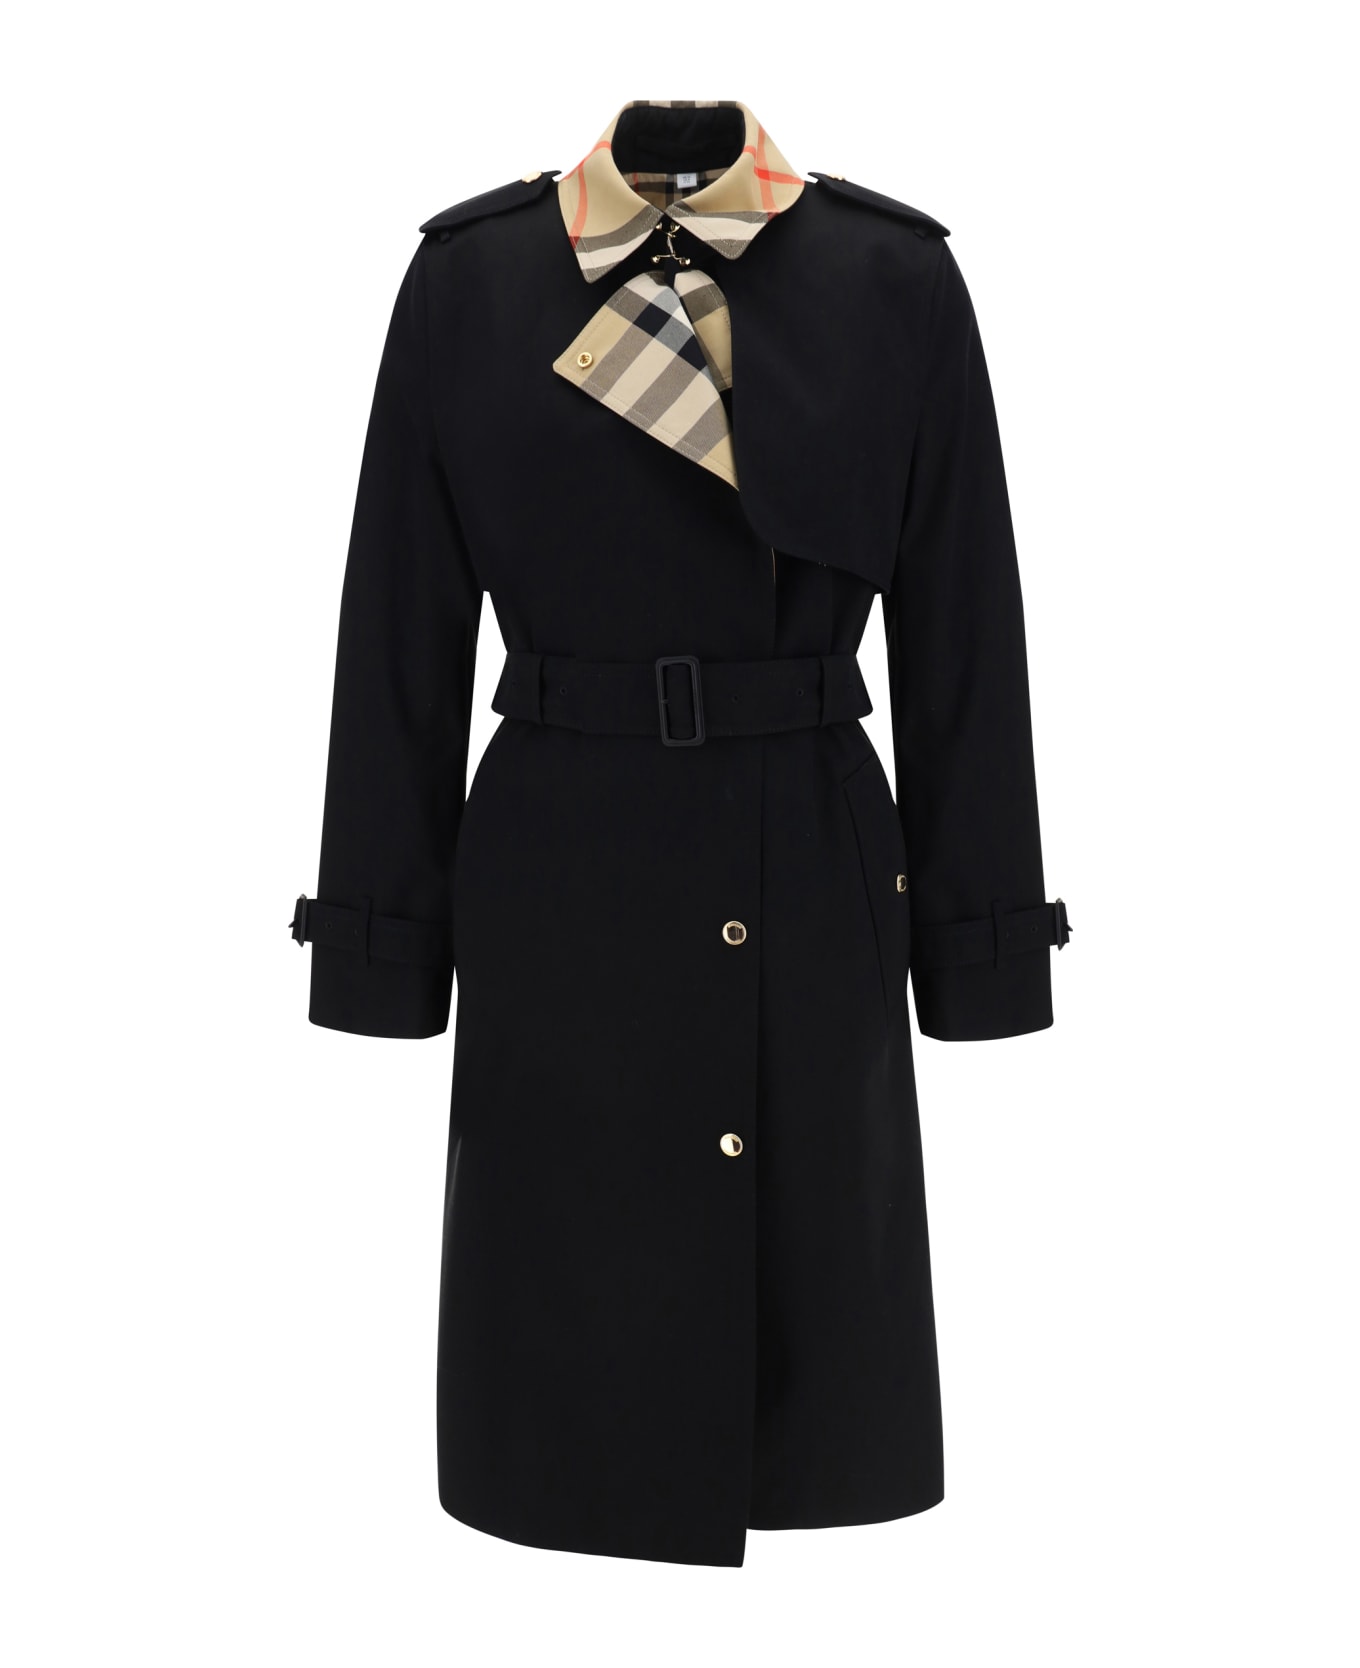 Burberry Belted Trench Coat - Black